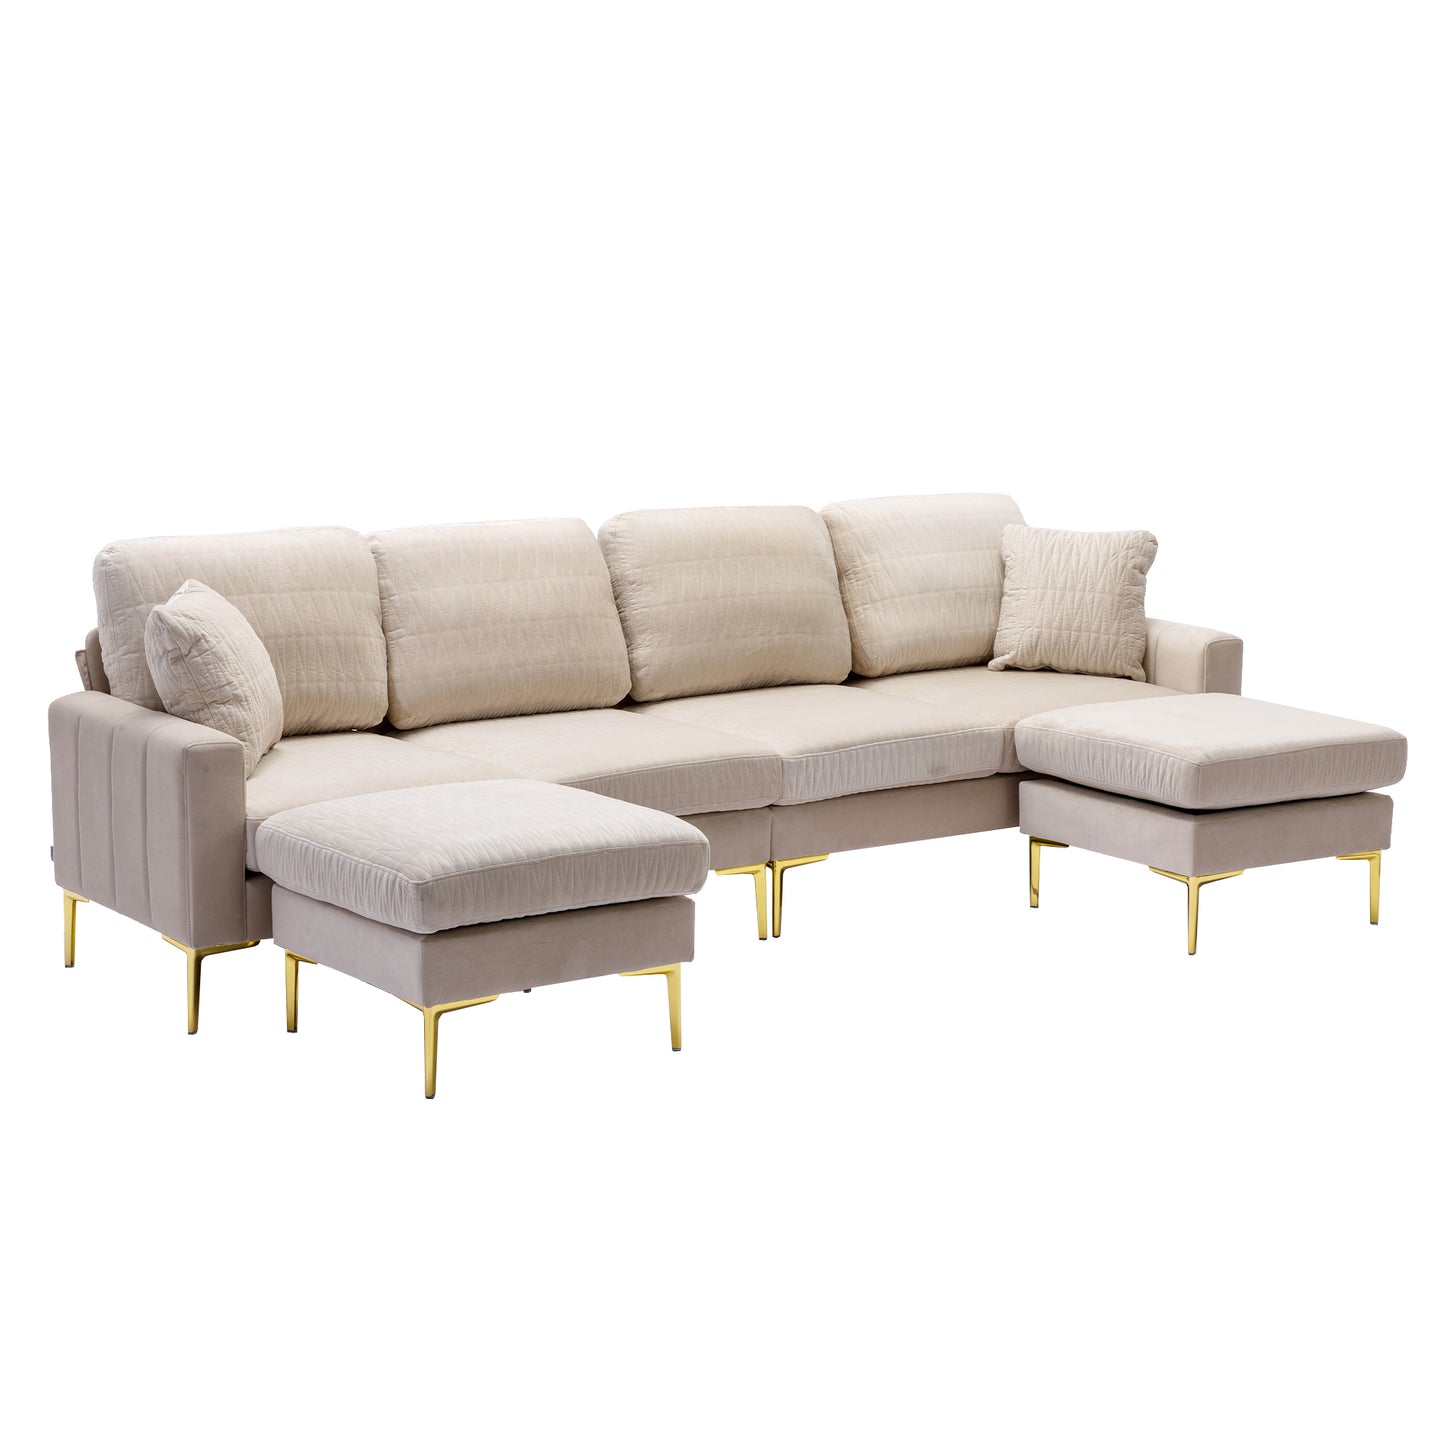 UNTIED WE WIN Accent sofa /Living room sofa sectional  sofa